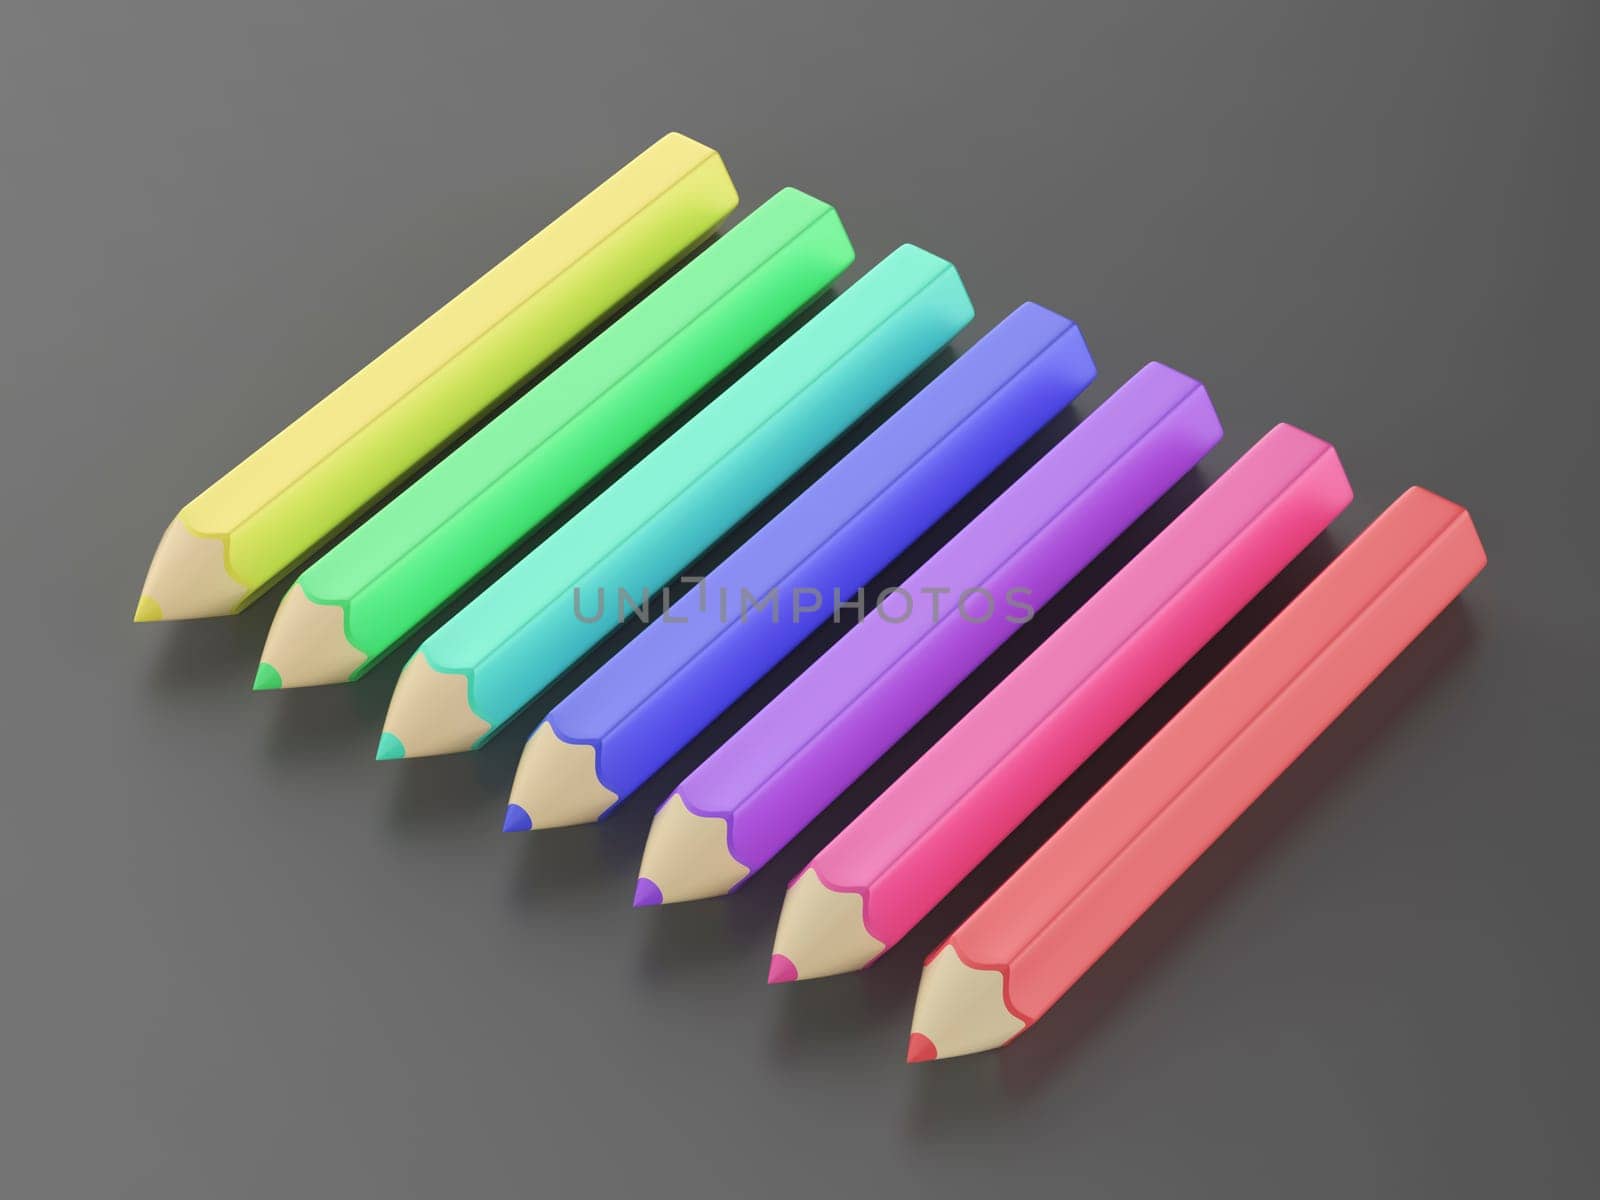 Seven cartoon style colored pencils by magraphics